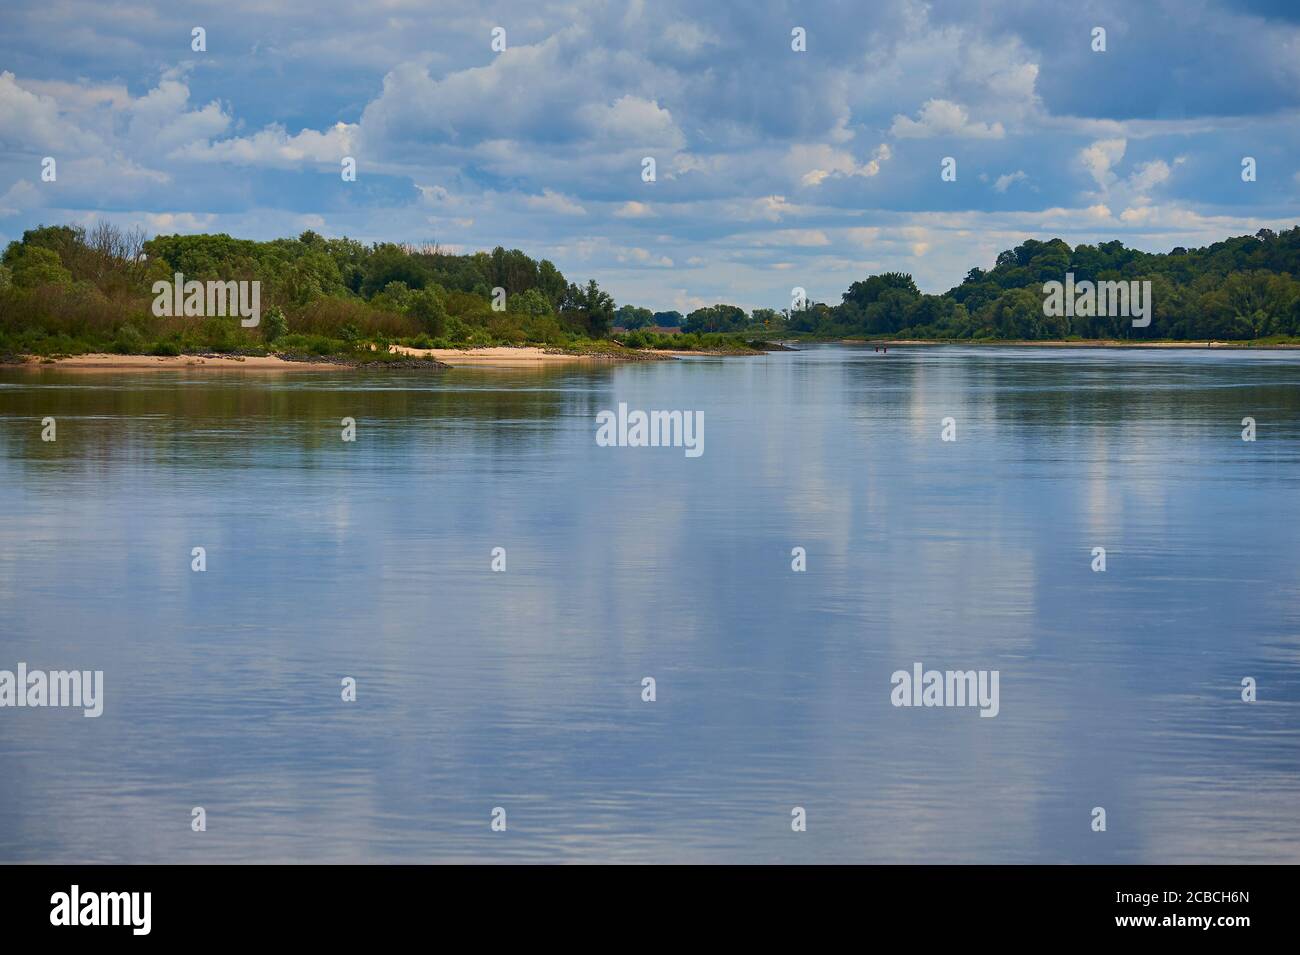 River Elbe calmly flowing away in the river valley floodplains between Bleckede and Boizenburg, Northern Germany Stock Photo